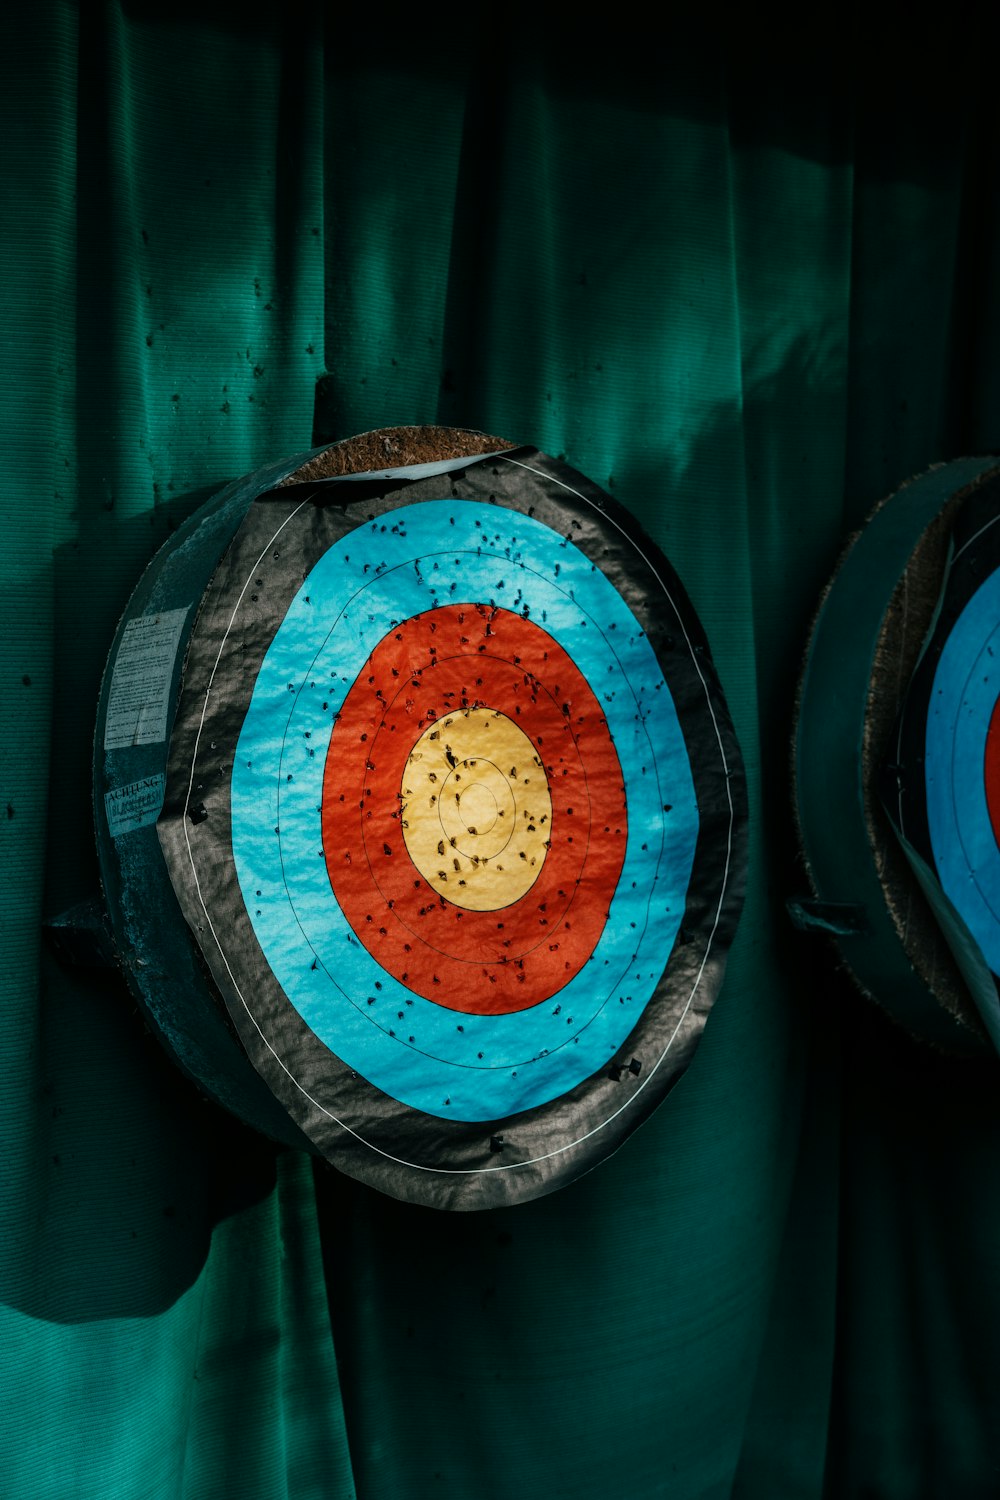 a close up of a target on a green curtain